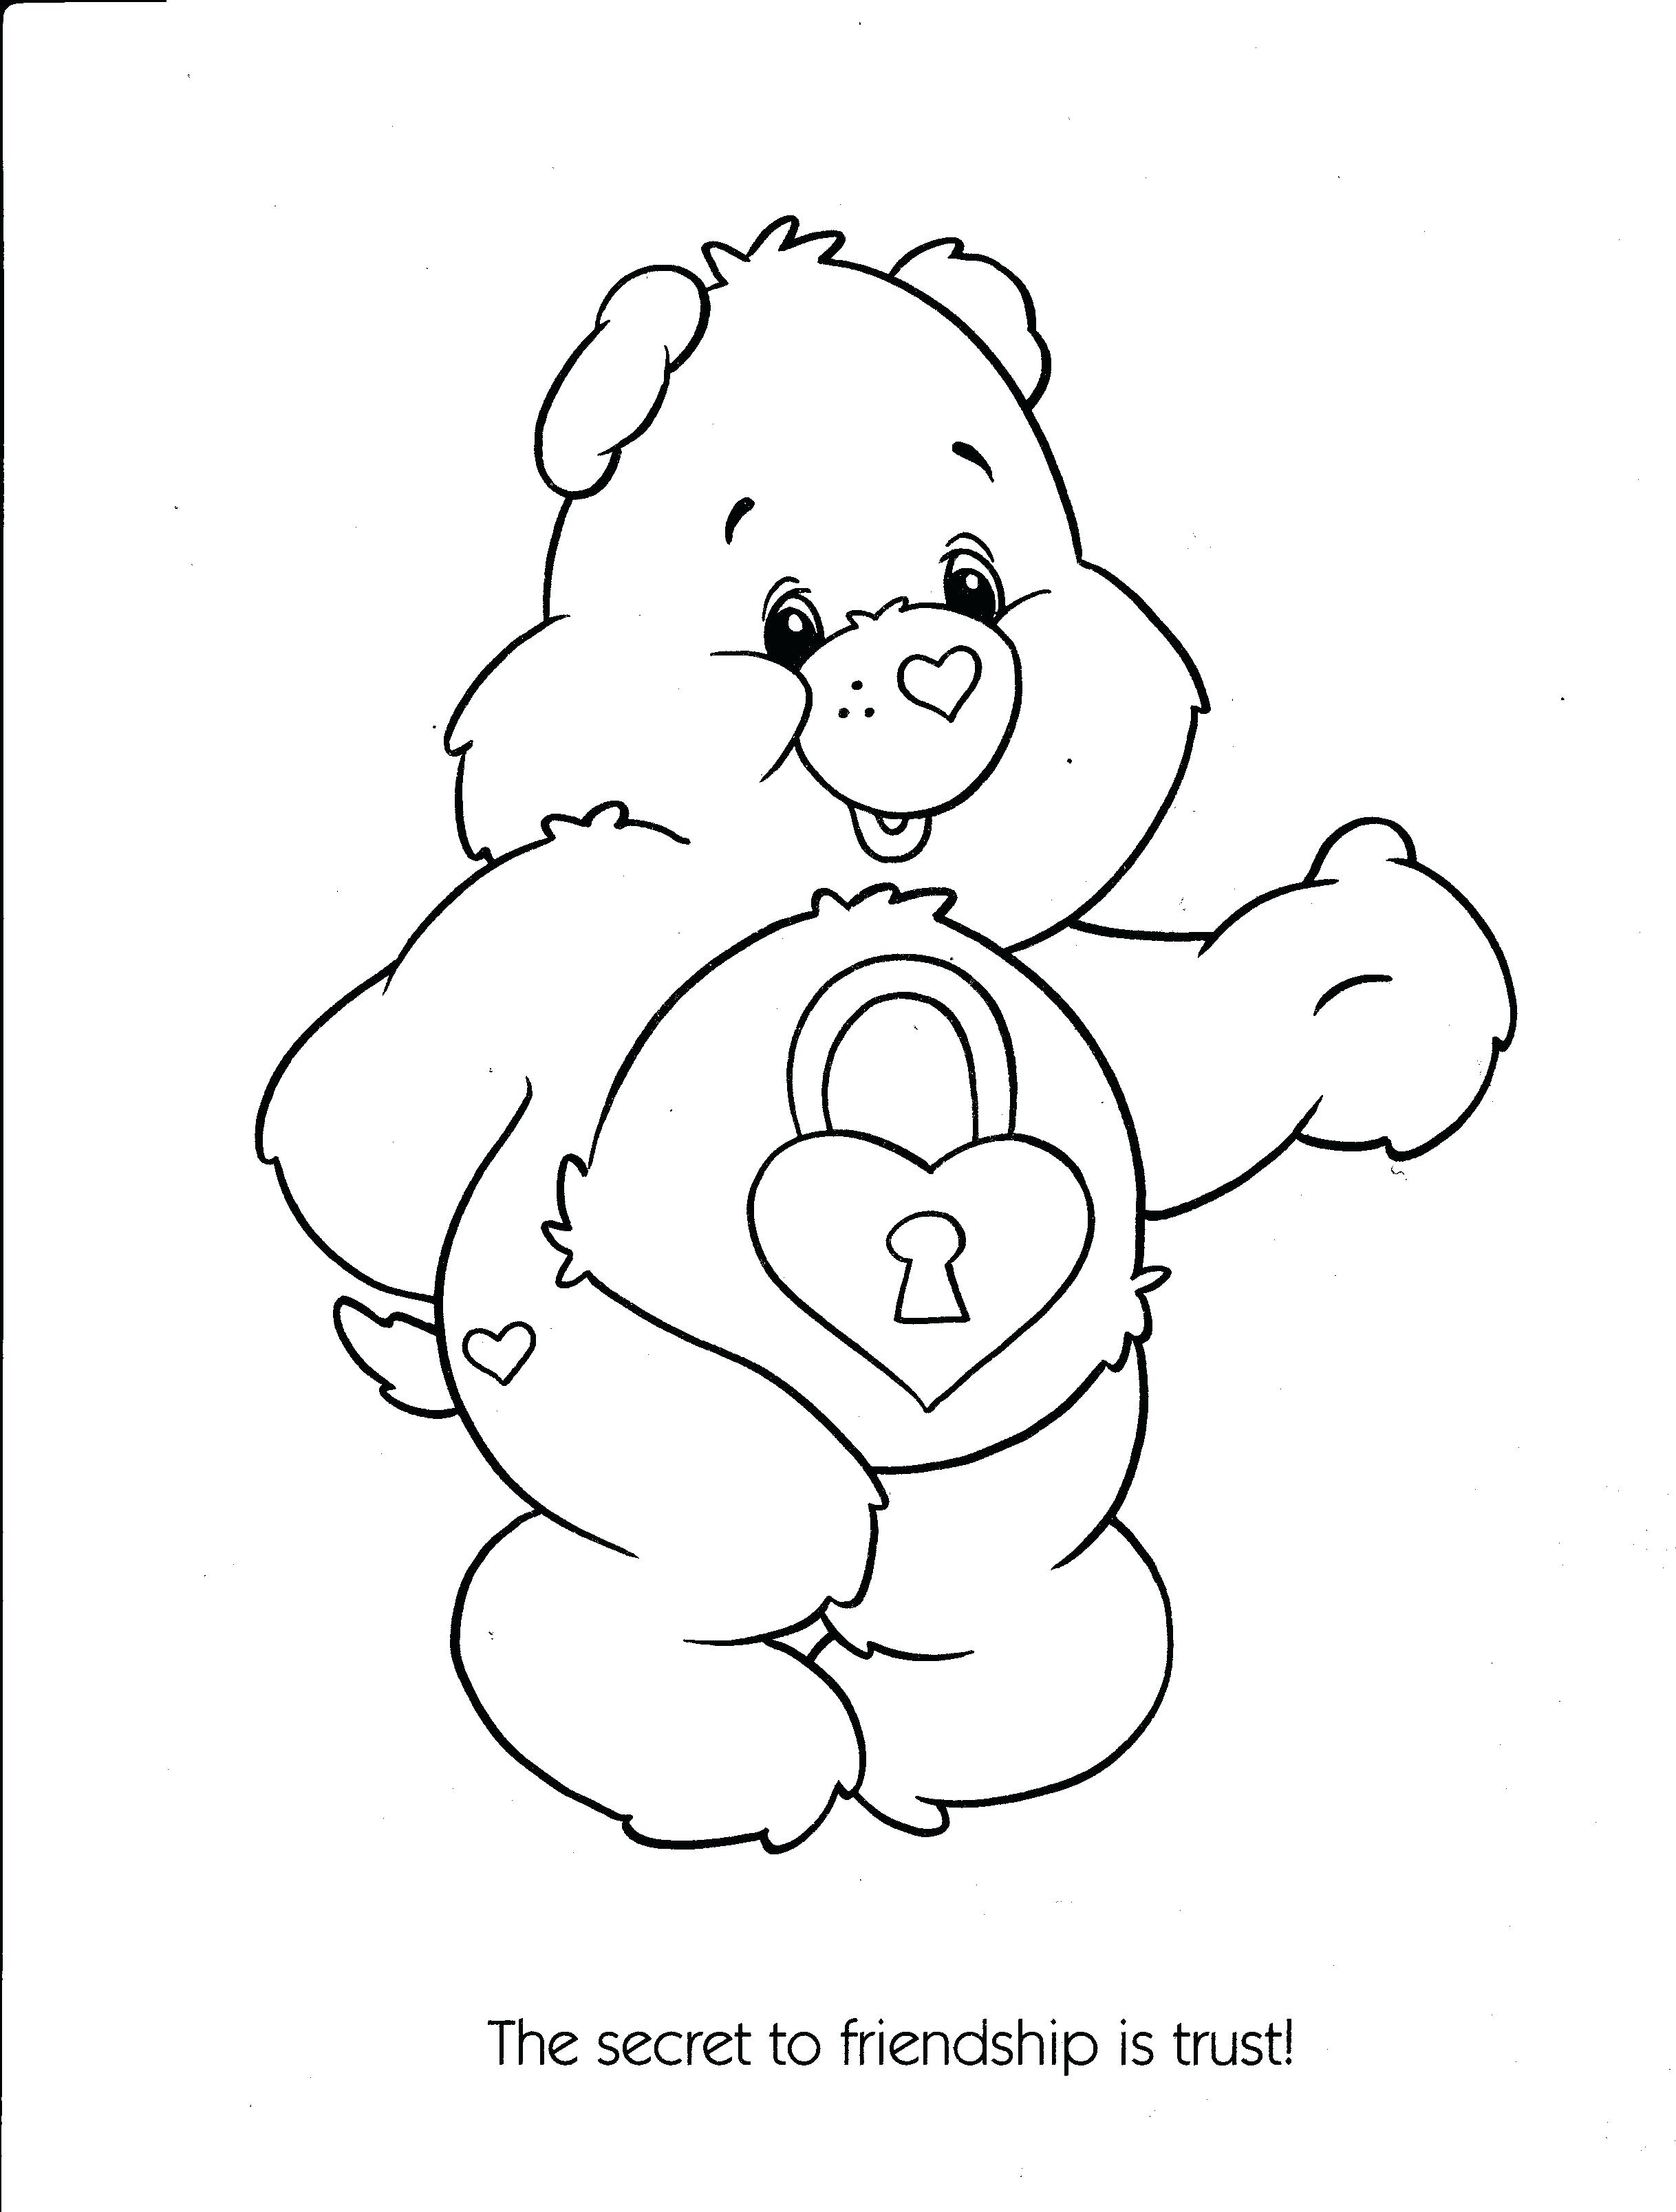 Free Care Bear Coloring Pages Free Care Bear Coloring Pages Crunchprintco